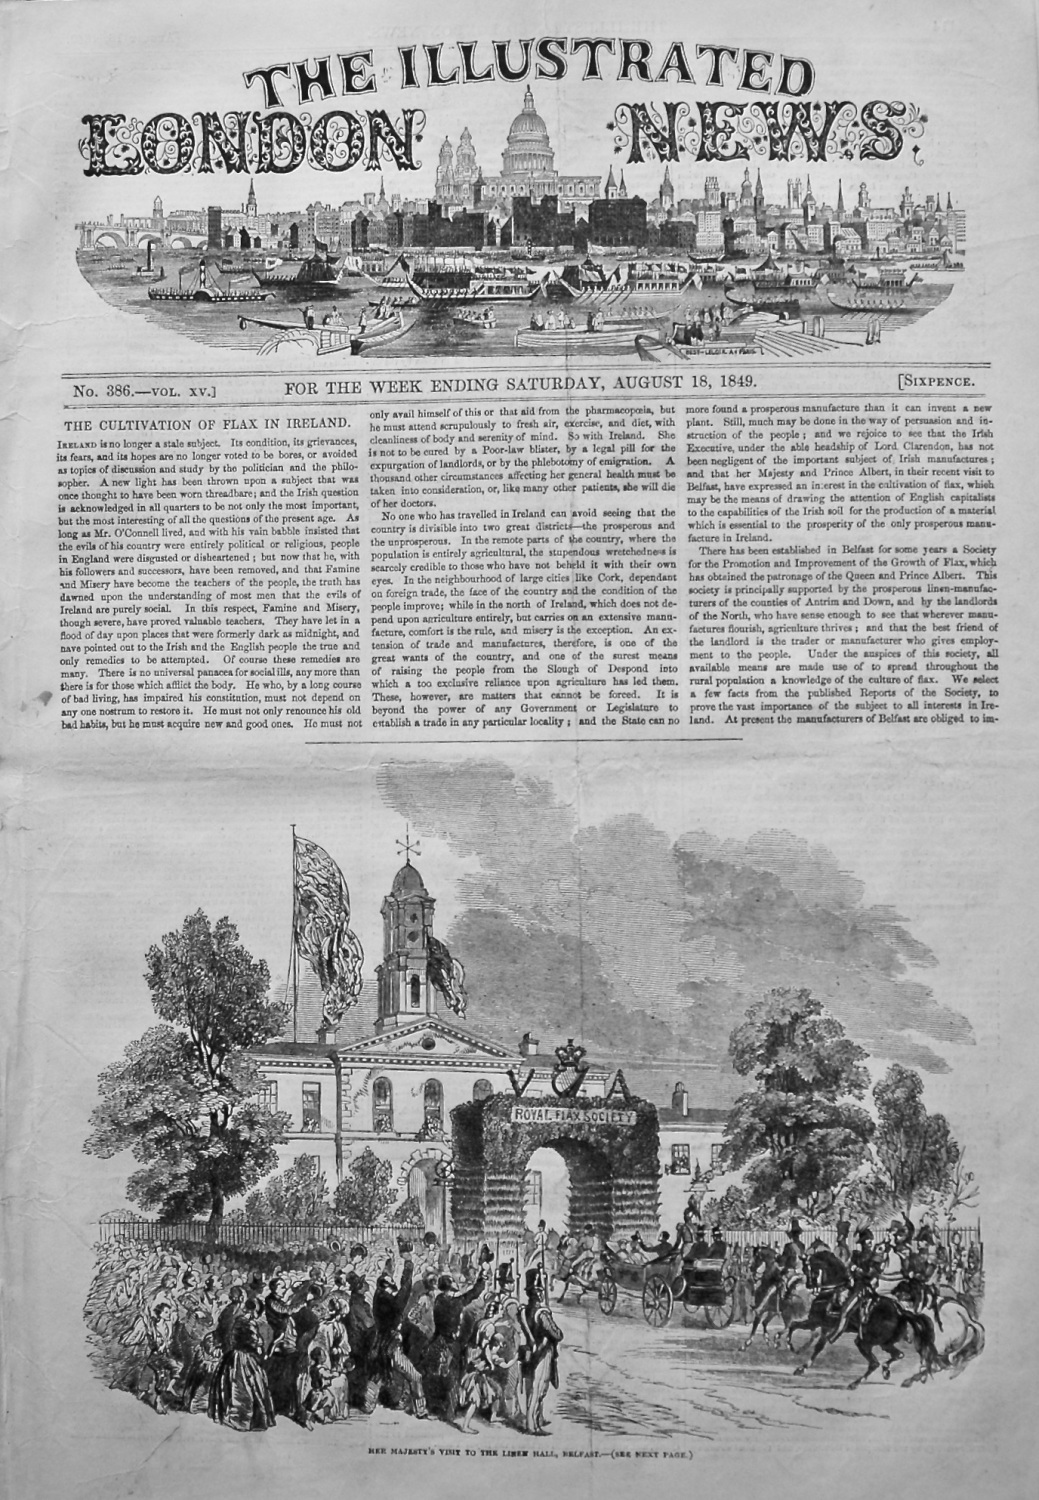 Illustrated London News. August 18th, 1849.